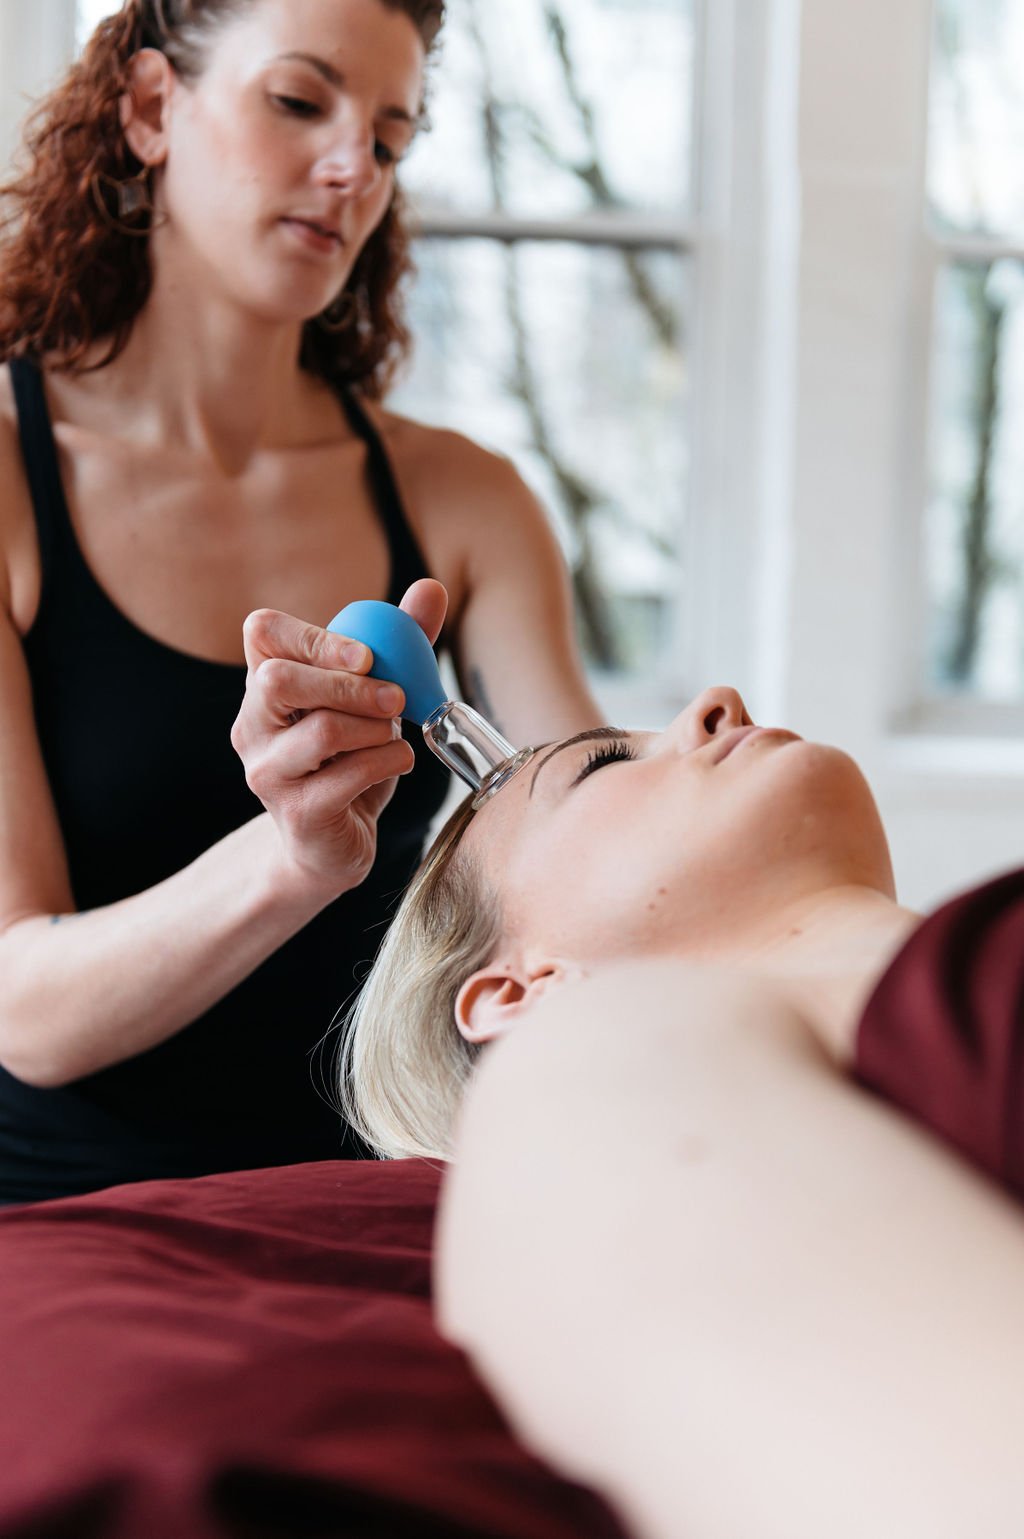 A woman receiving a massage with a blue device. Captured by a brand photographer in Portland.